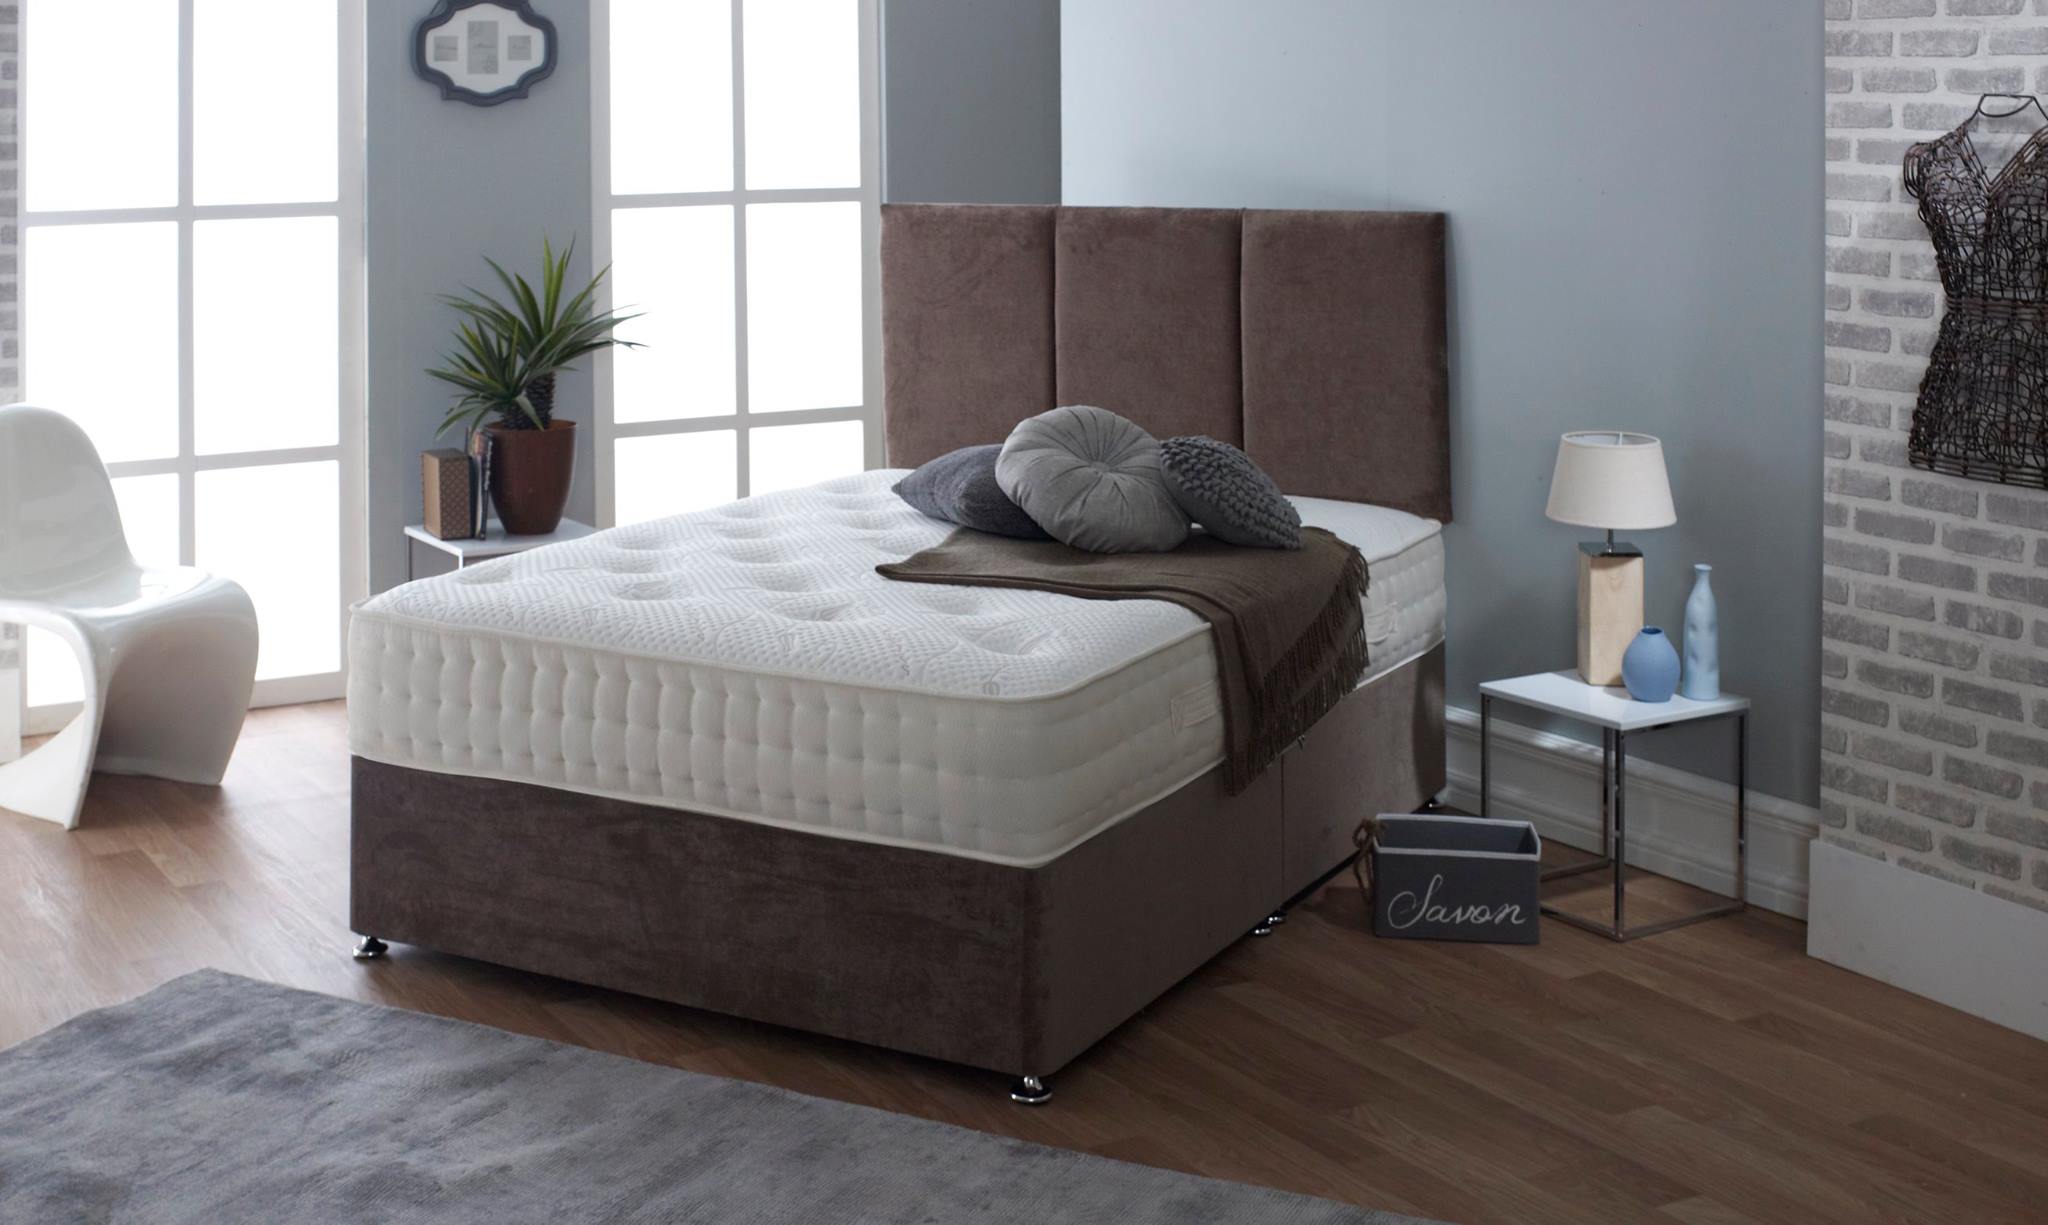 Bedrush Beds Collection